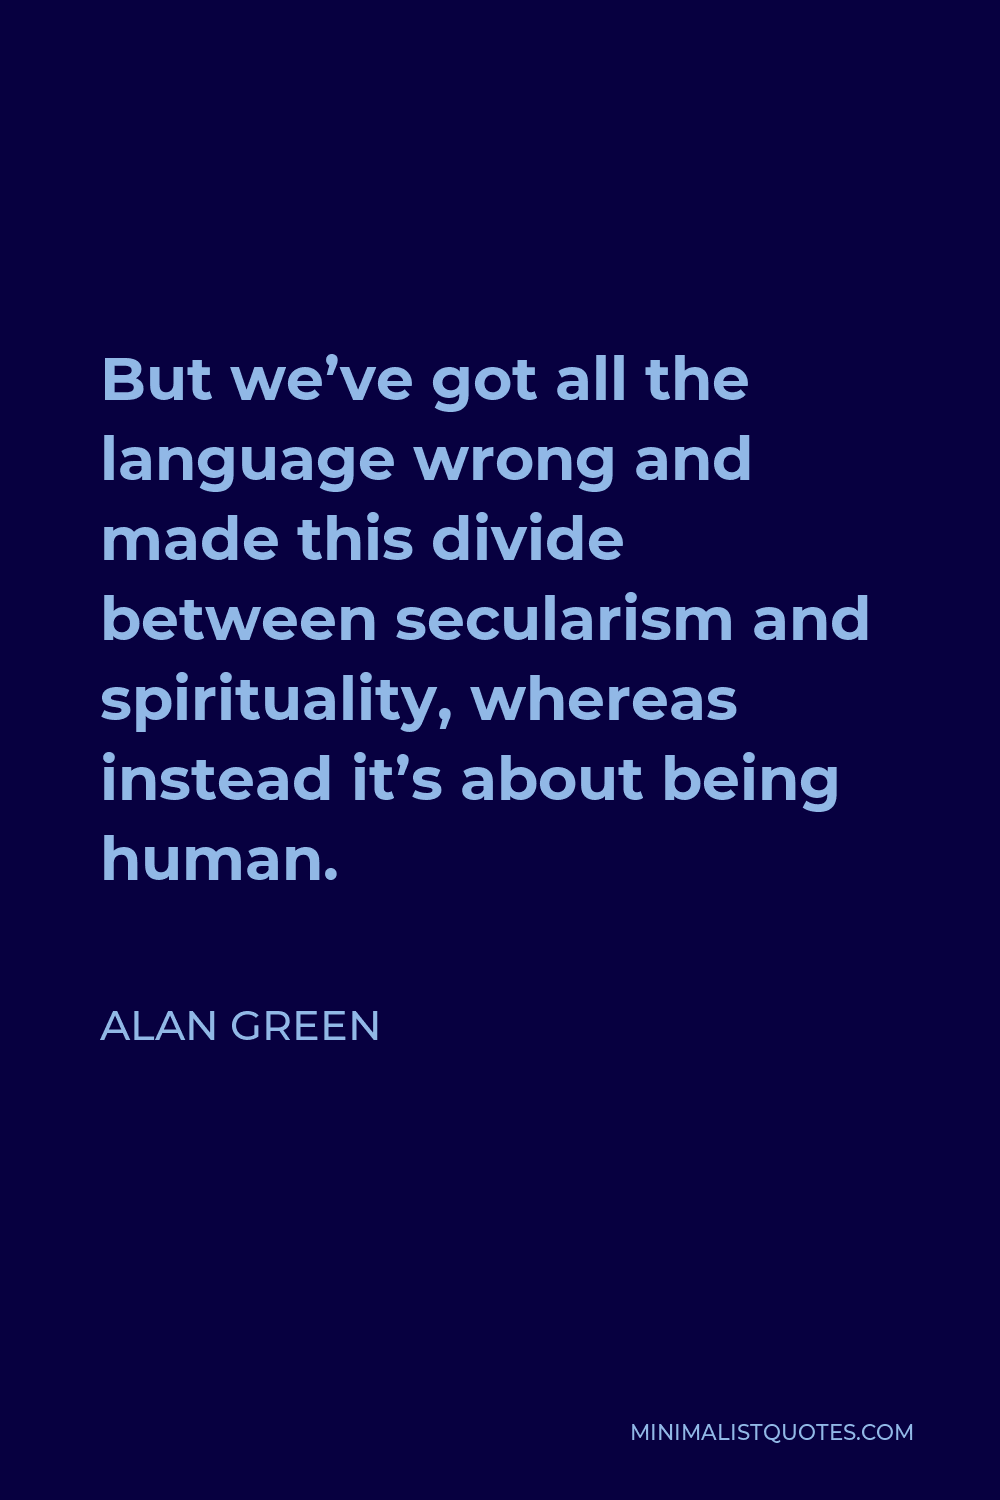 Alan Green Quote - But we’ve got all the language wrong and made this divide between secularism and spirituality, whereas instead it’s about being human.